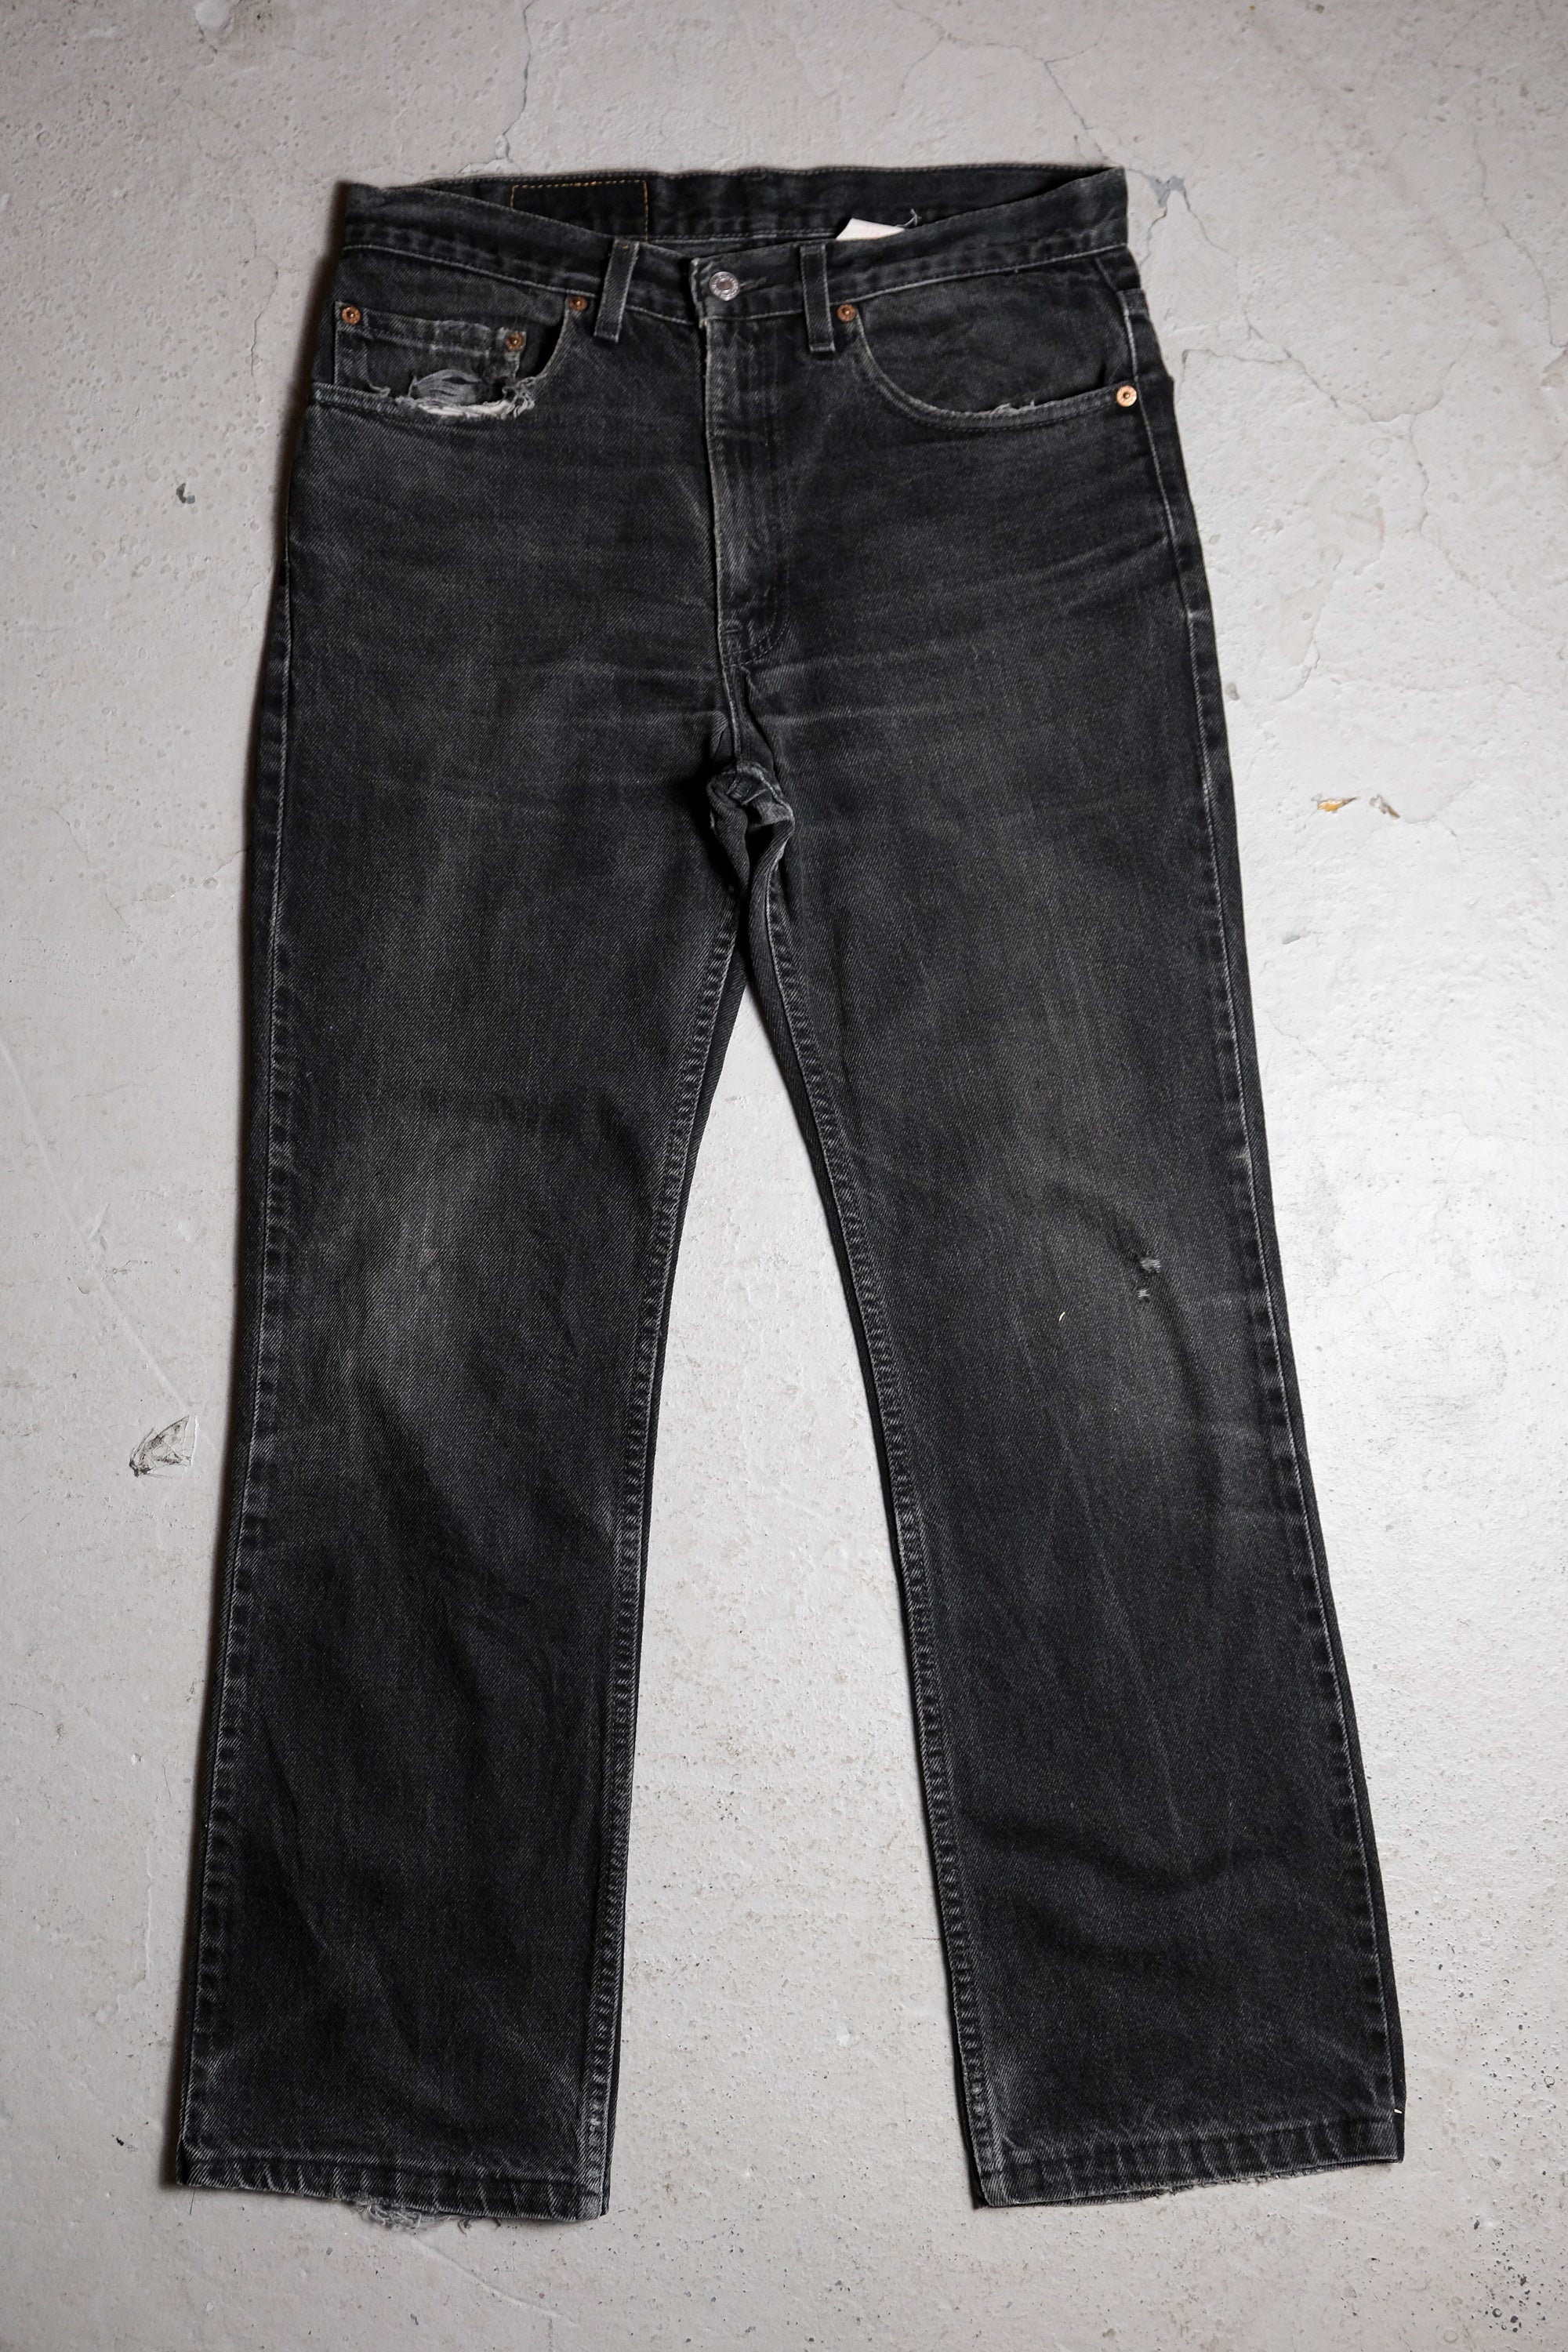 PT Torino Jeans Stretch Denim Swing Black Faded and Paint Stained